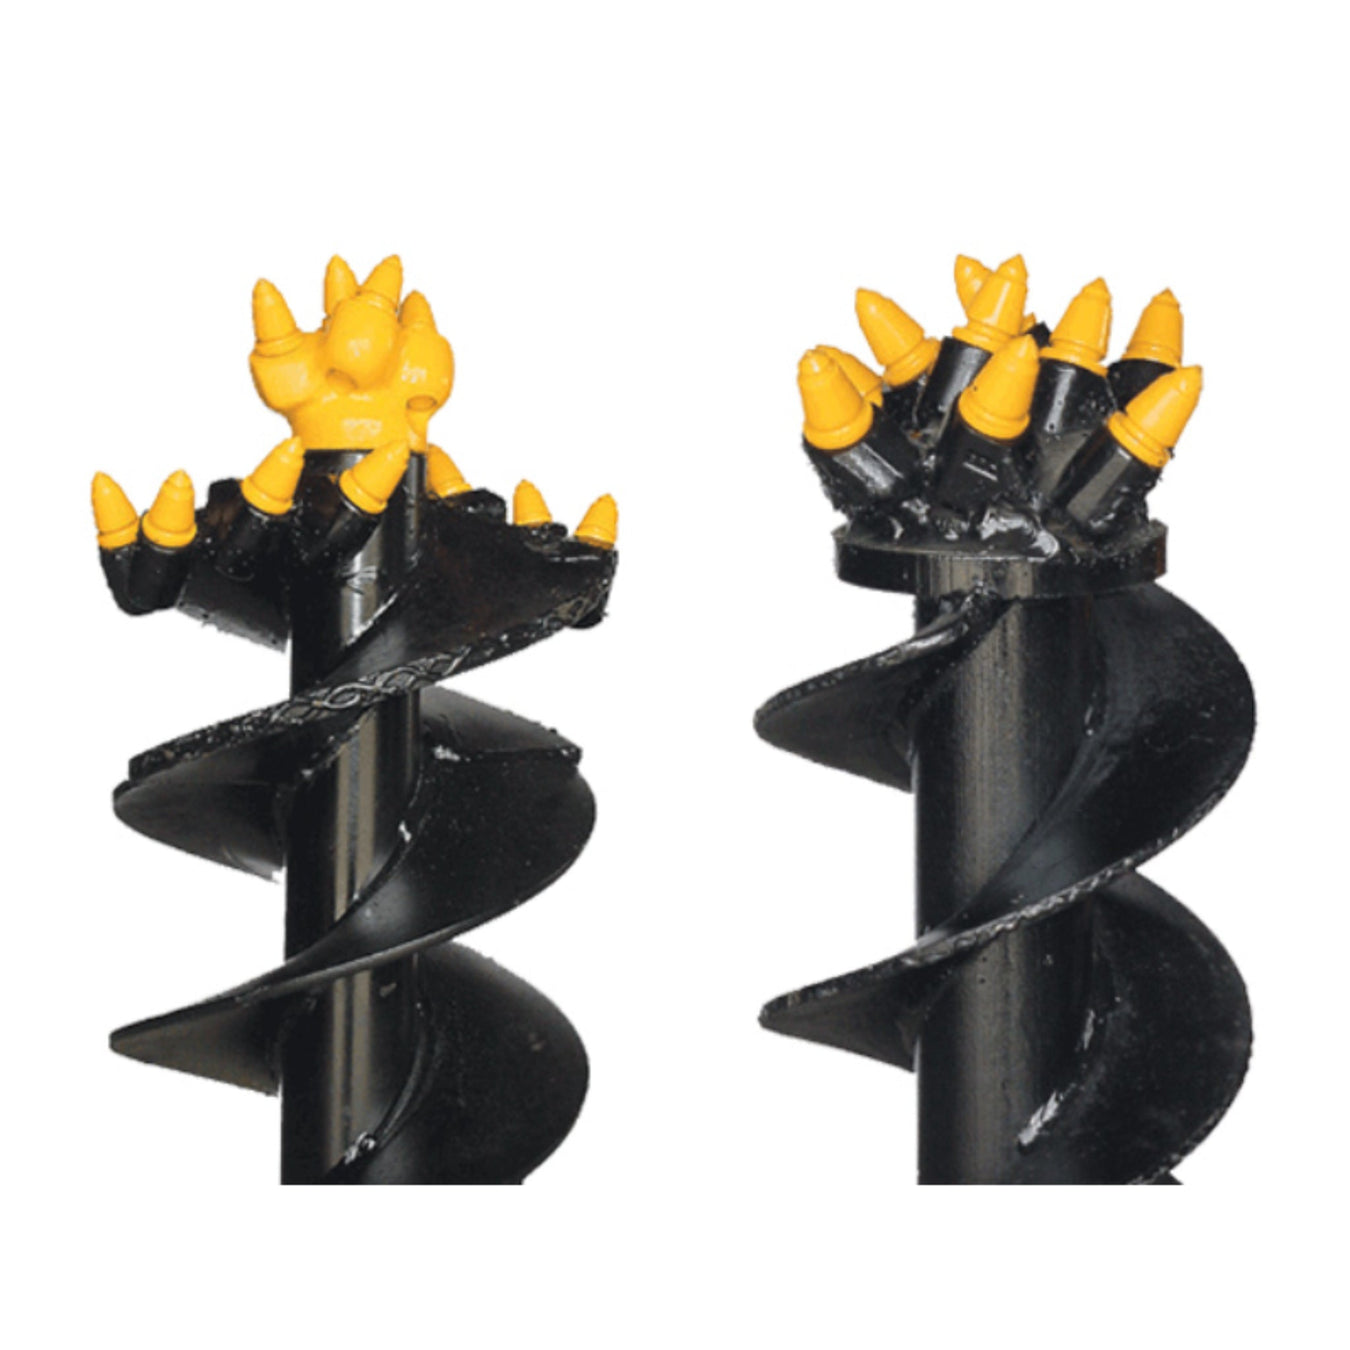 Mini Skid Steer Auger Bits - Attachments King